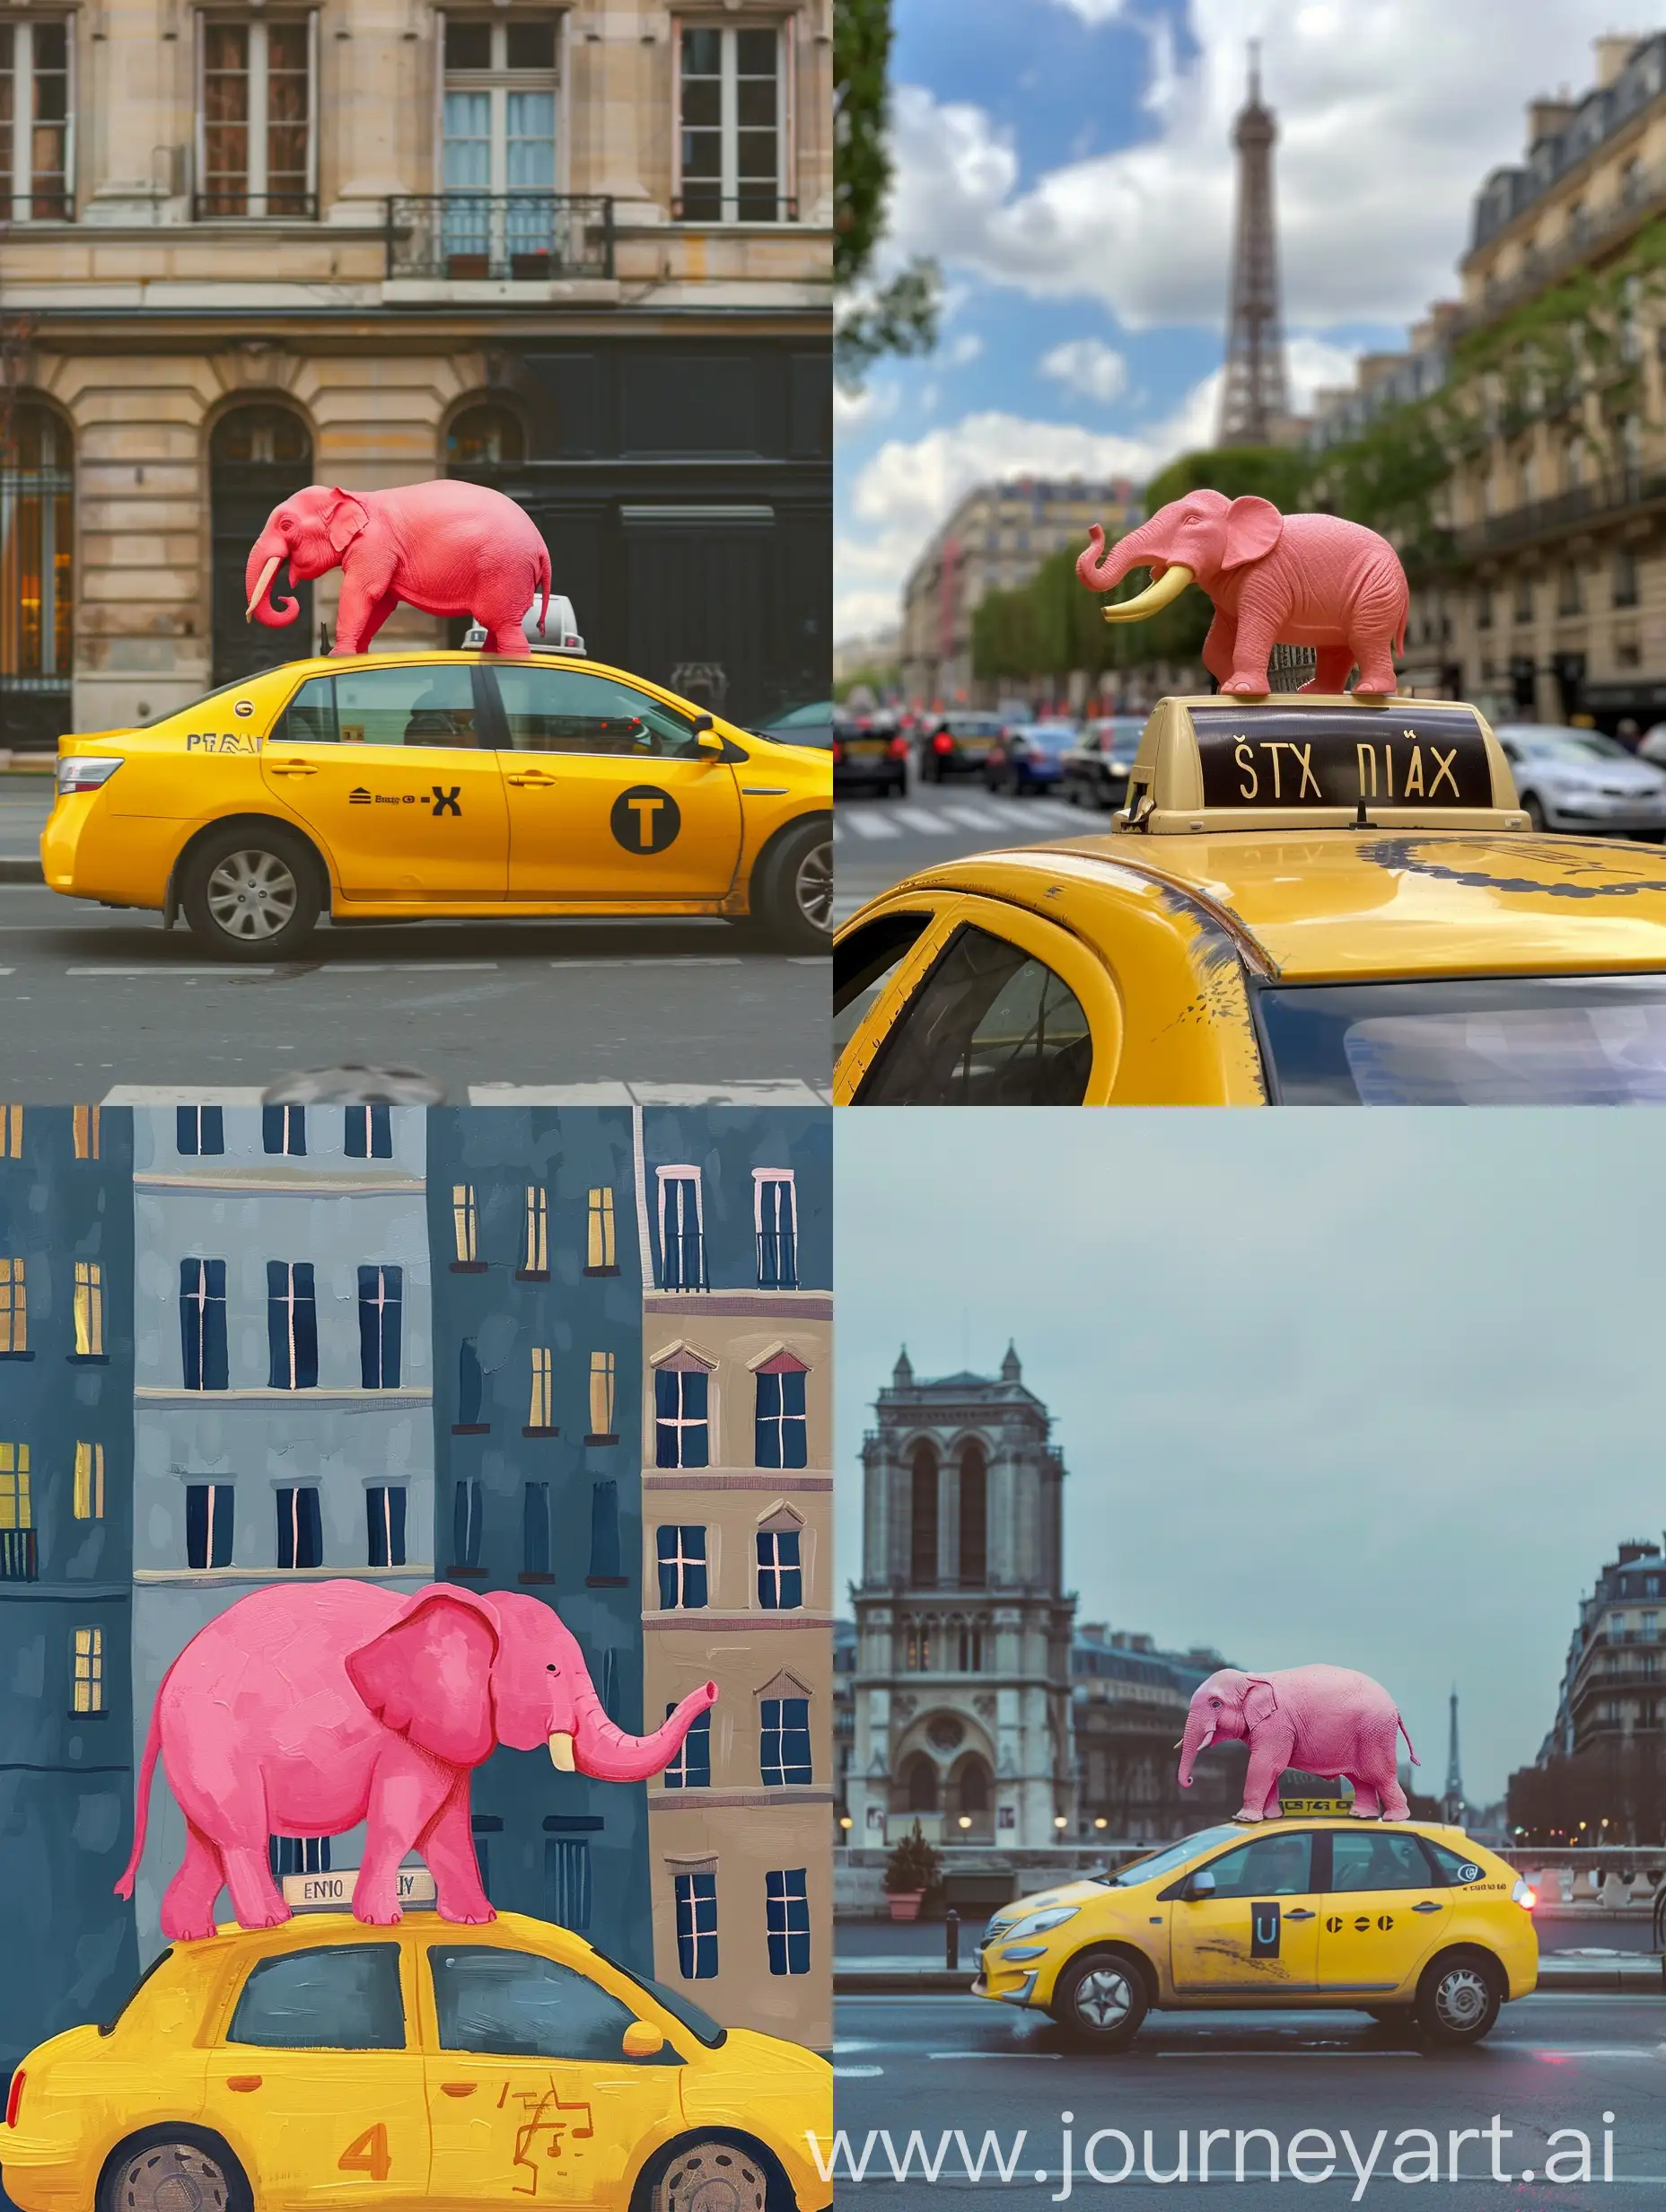 pink elephant in Paris on yellow taxi 